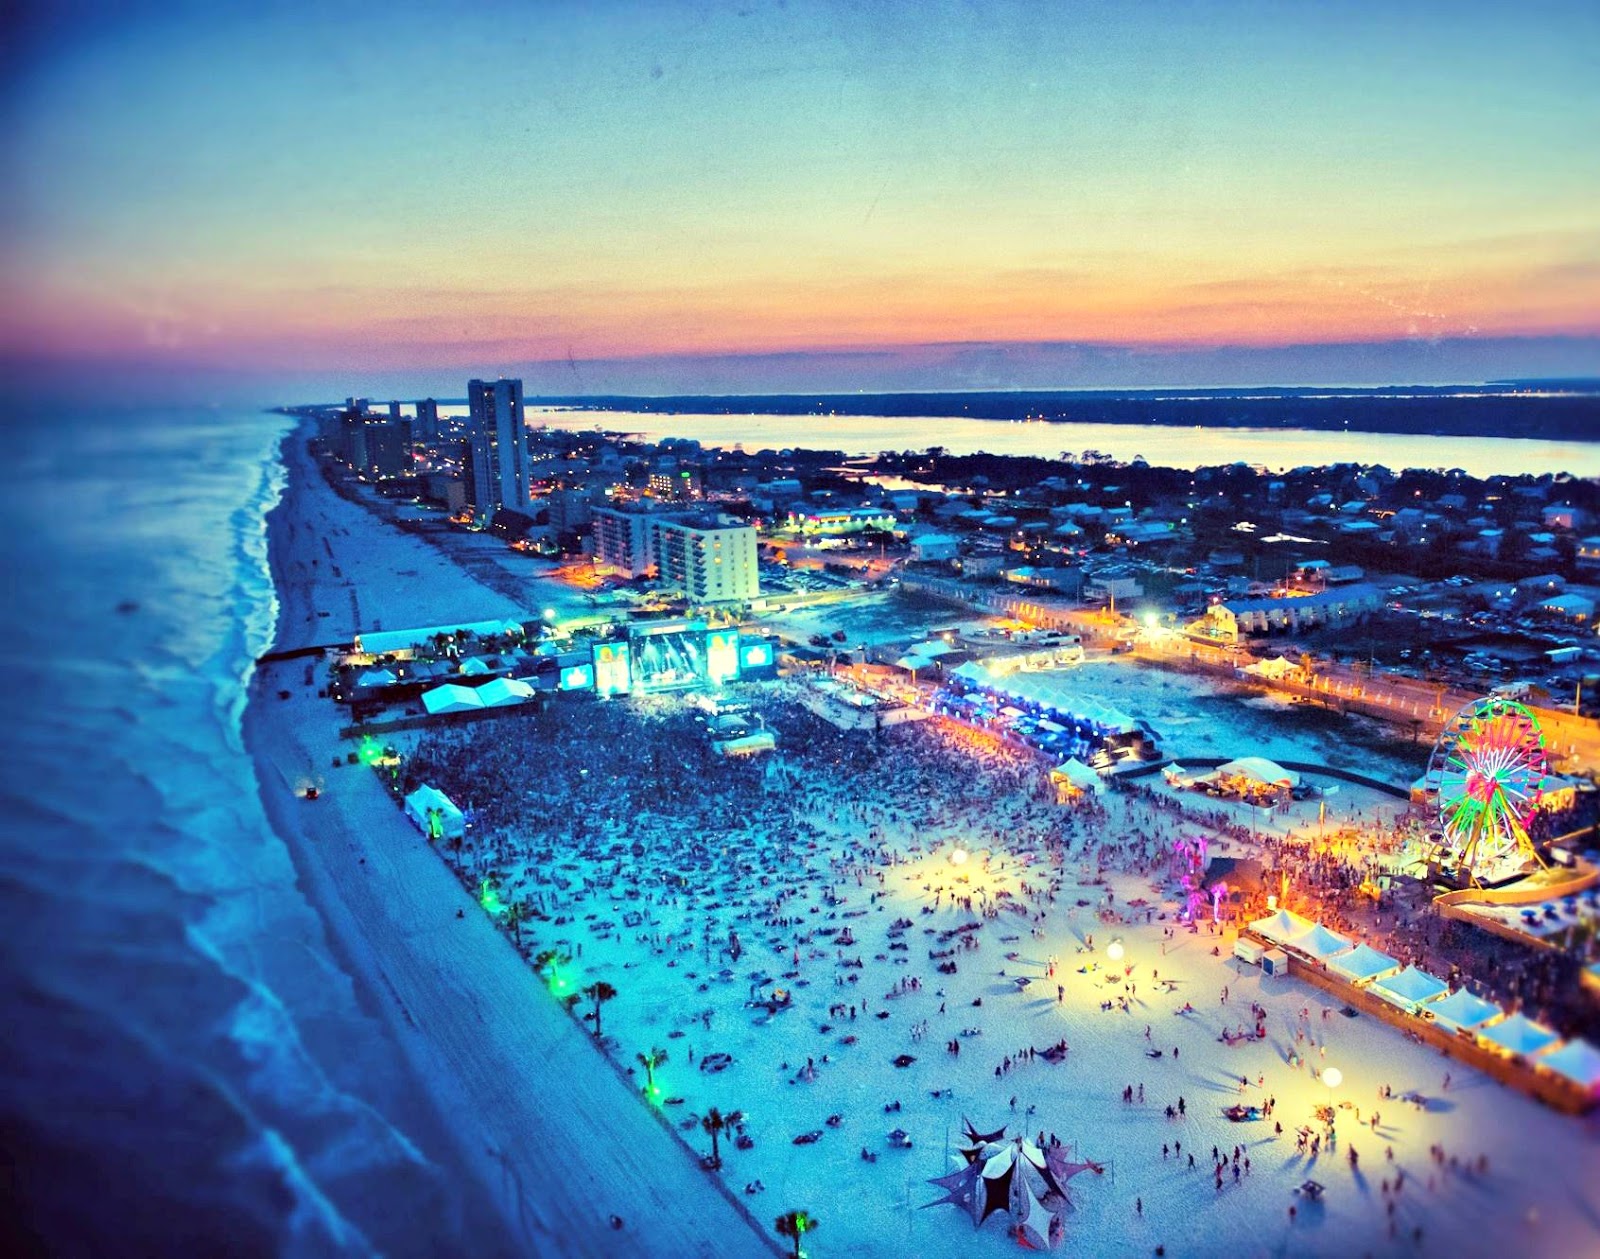 Gulf Shores Alabama Vacation Packages. |Travel Deals 2022 | Package